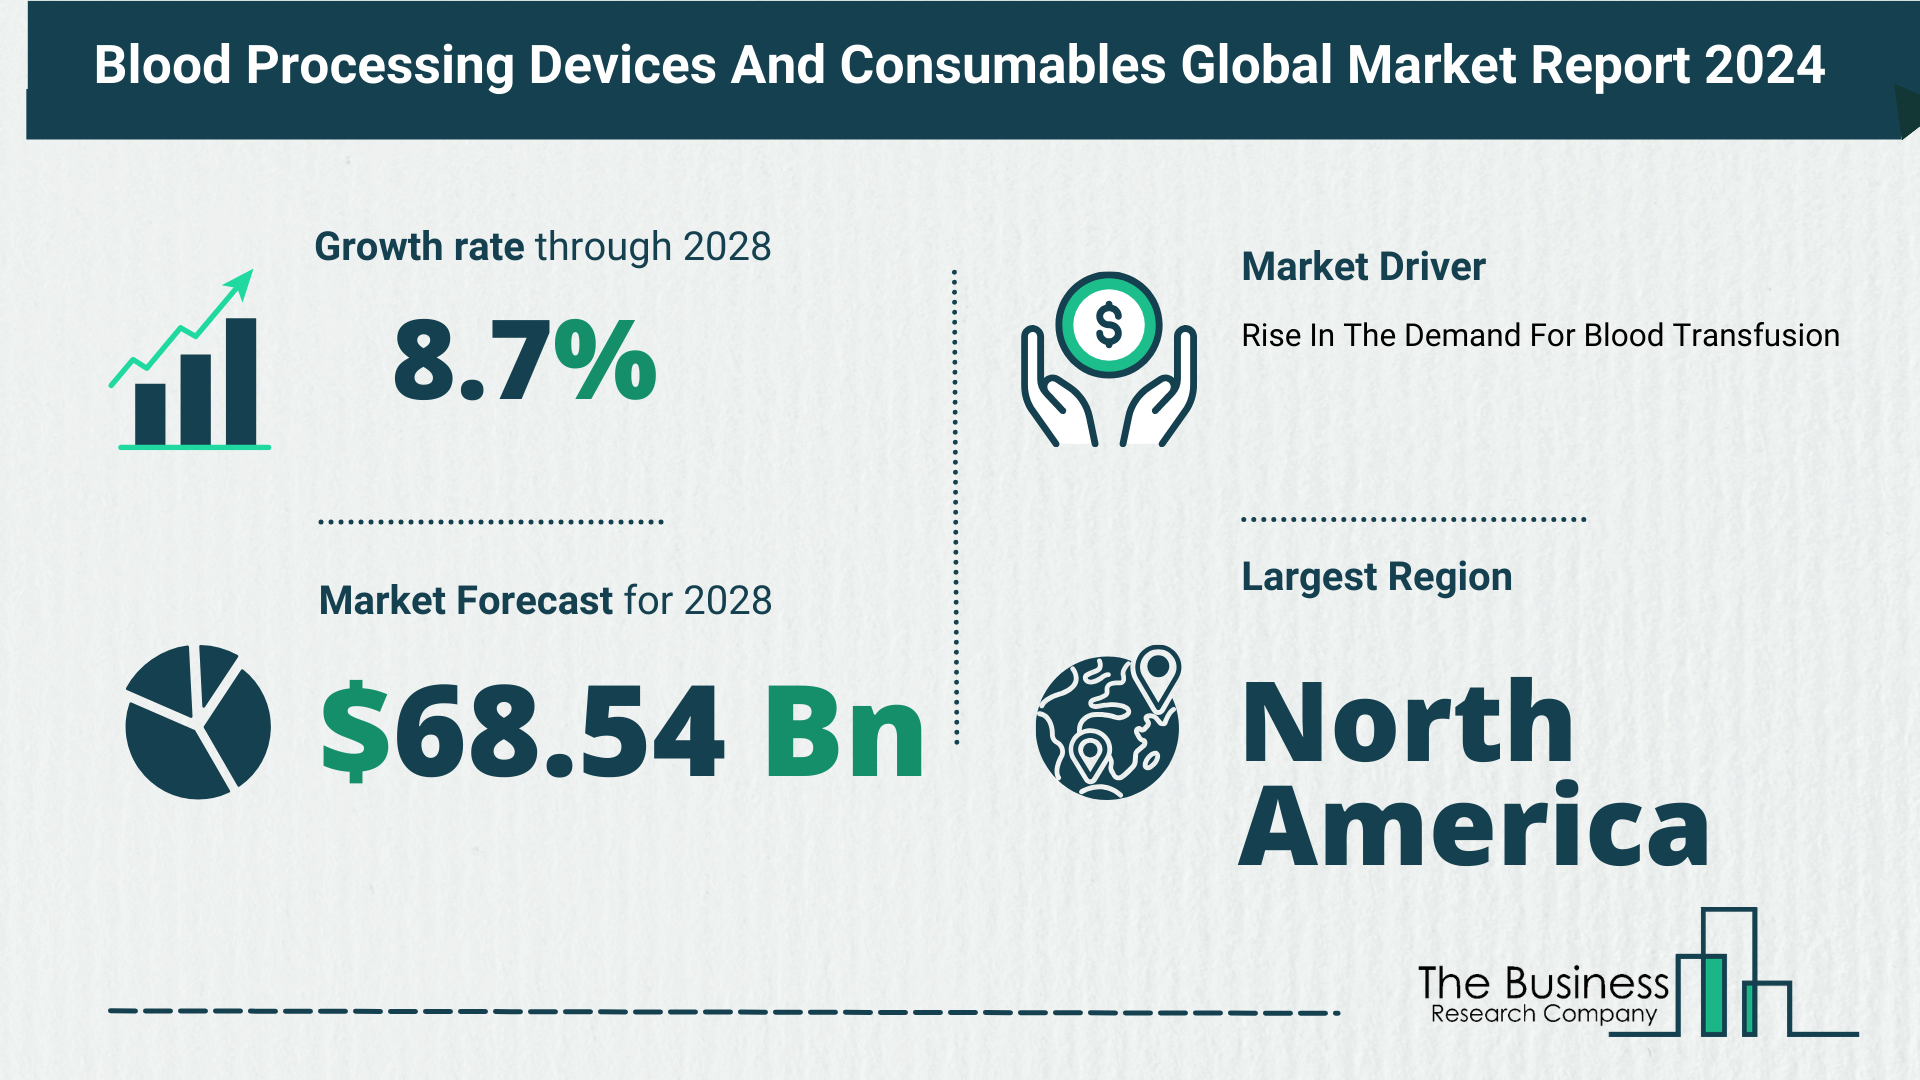 5 Key Insights On The Blood Processing Devices And Consumables Market 2024